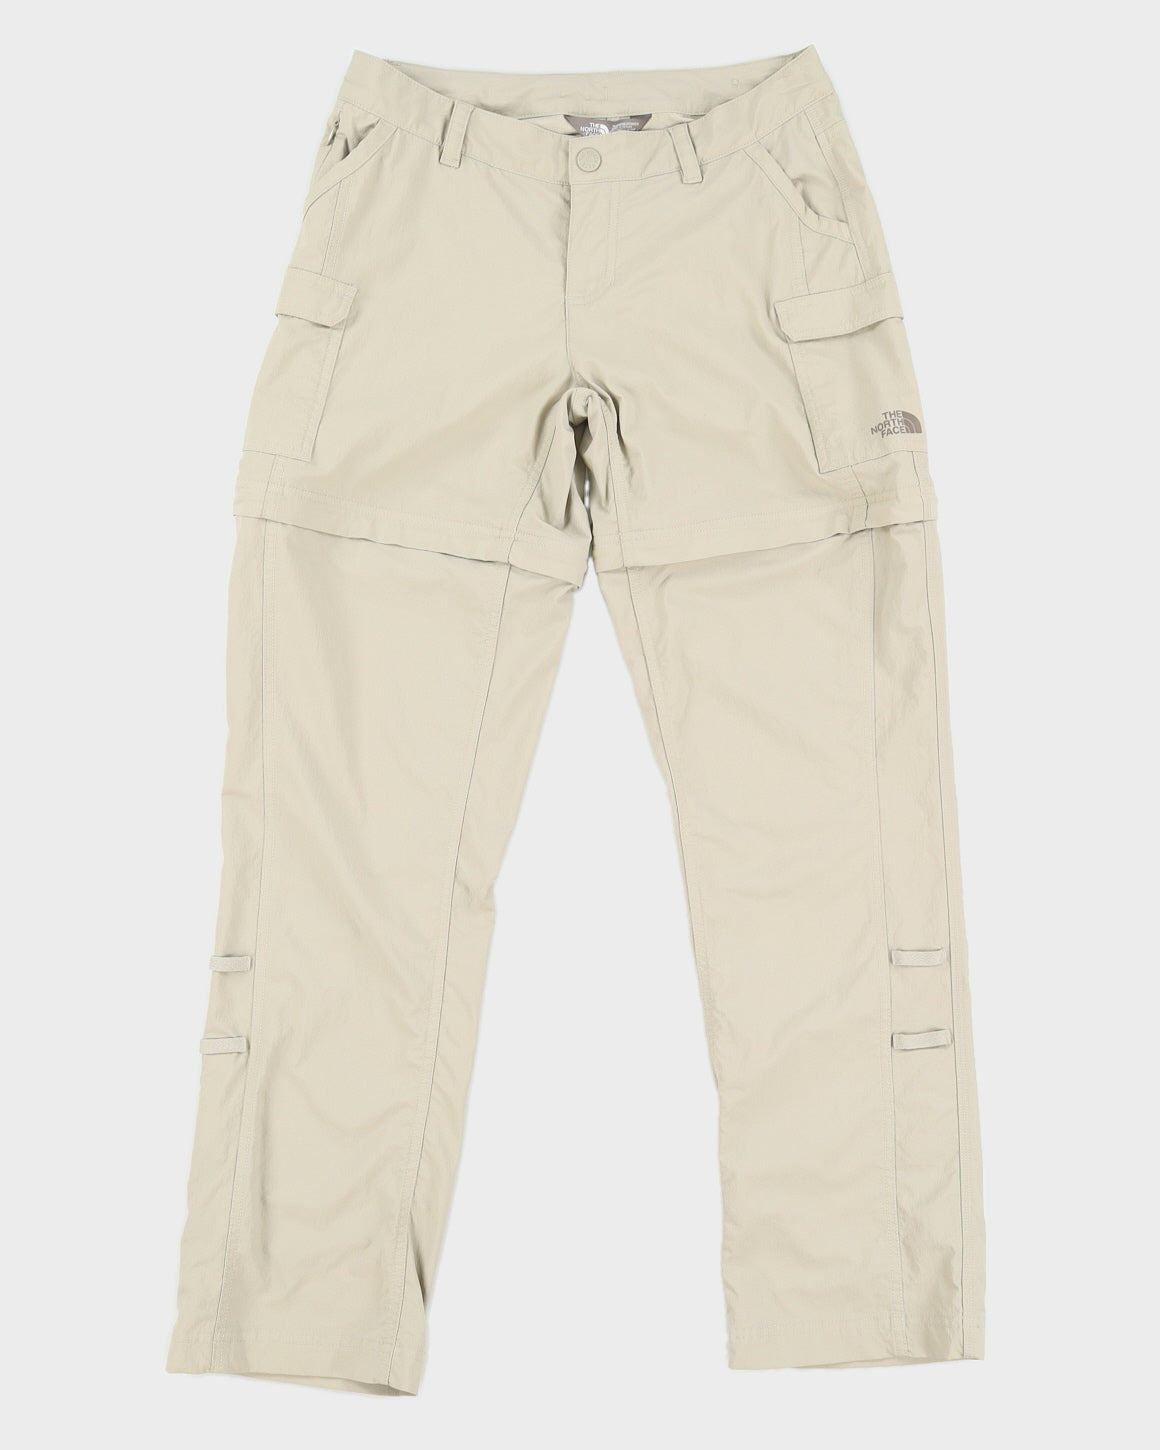 00s The North Face Beige Tear Off Nylon Trousers - W31 L31